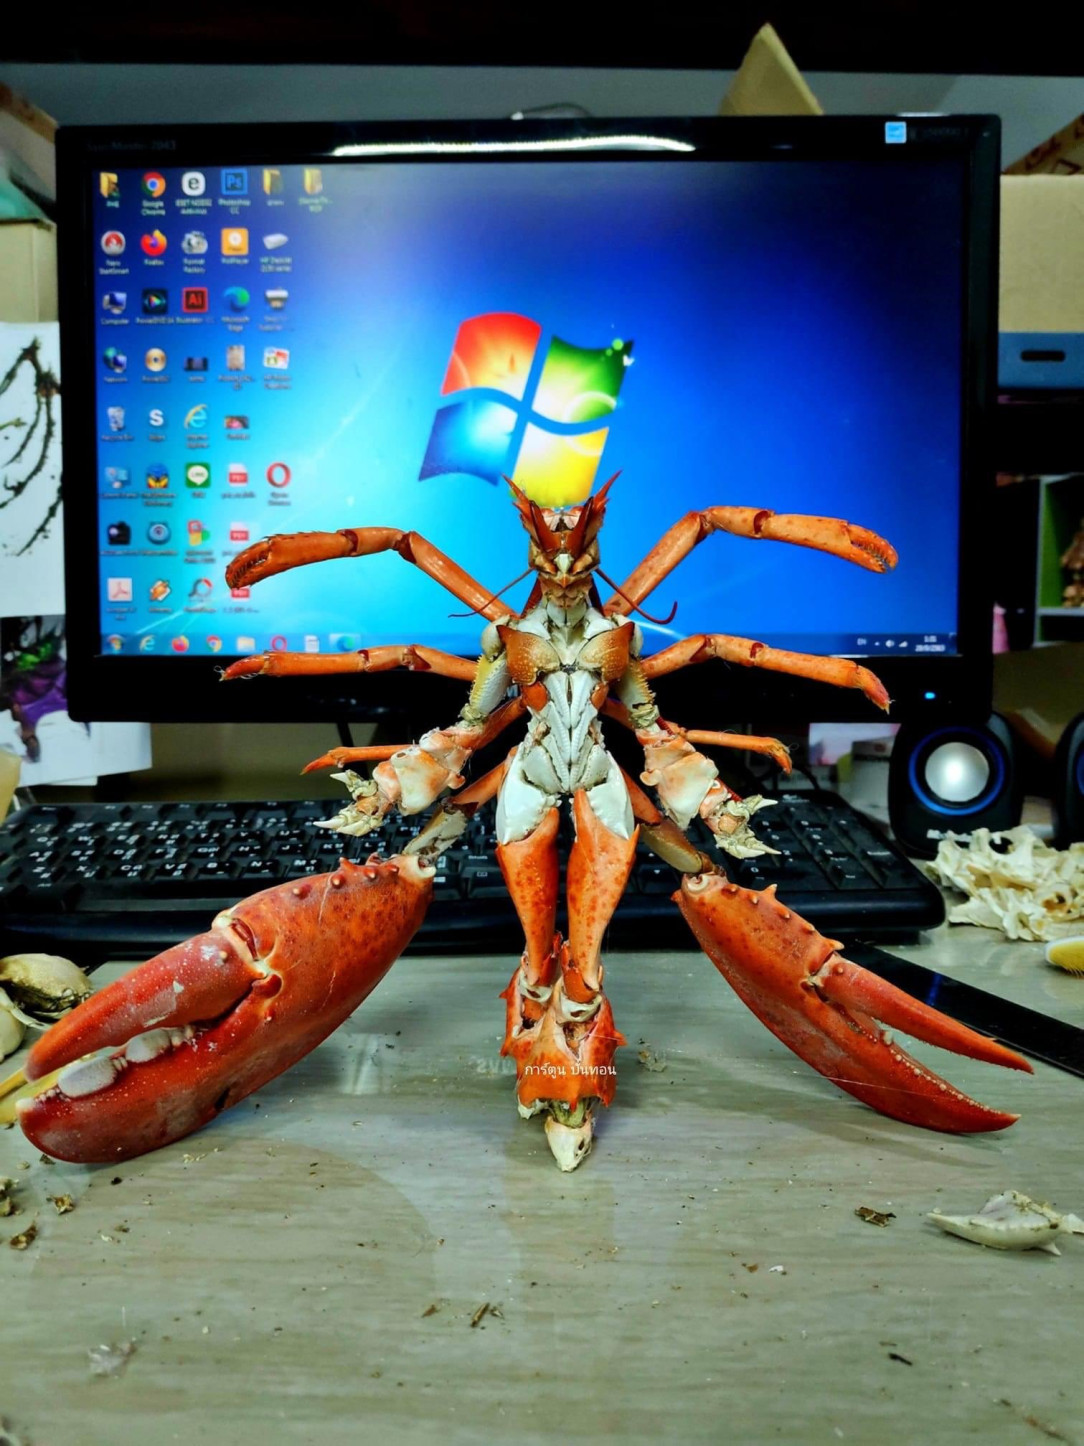 the sentient crab, protectors of the crab people